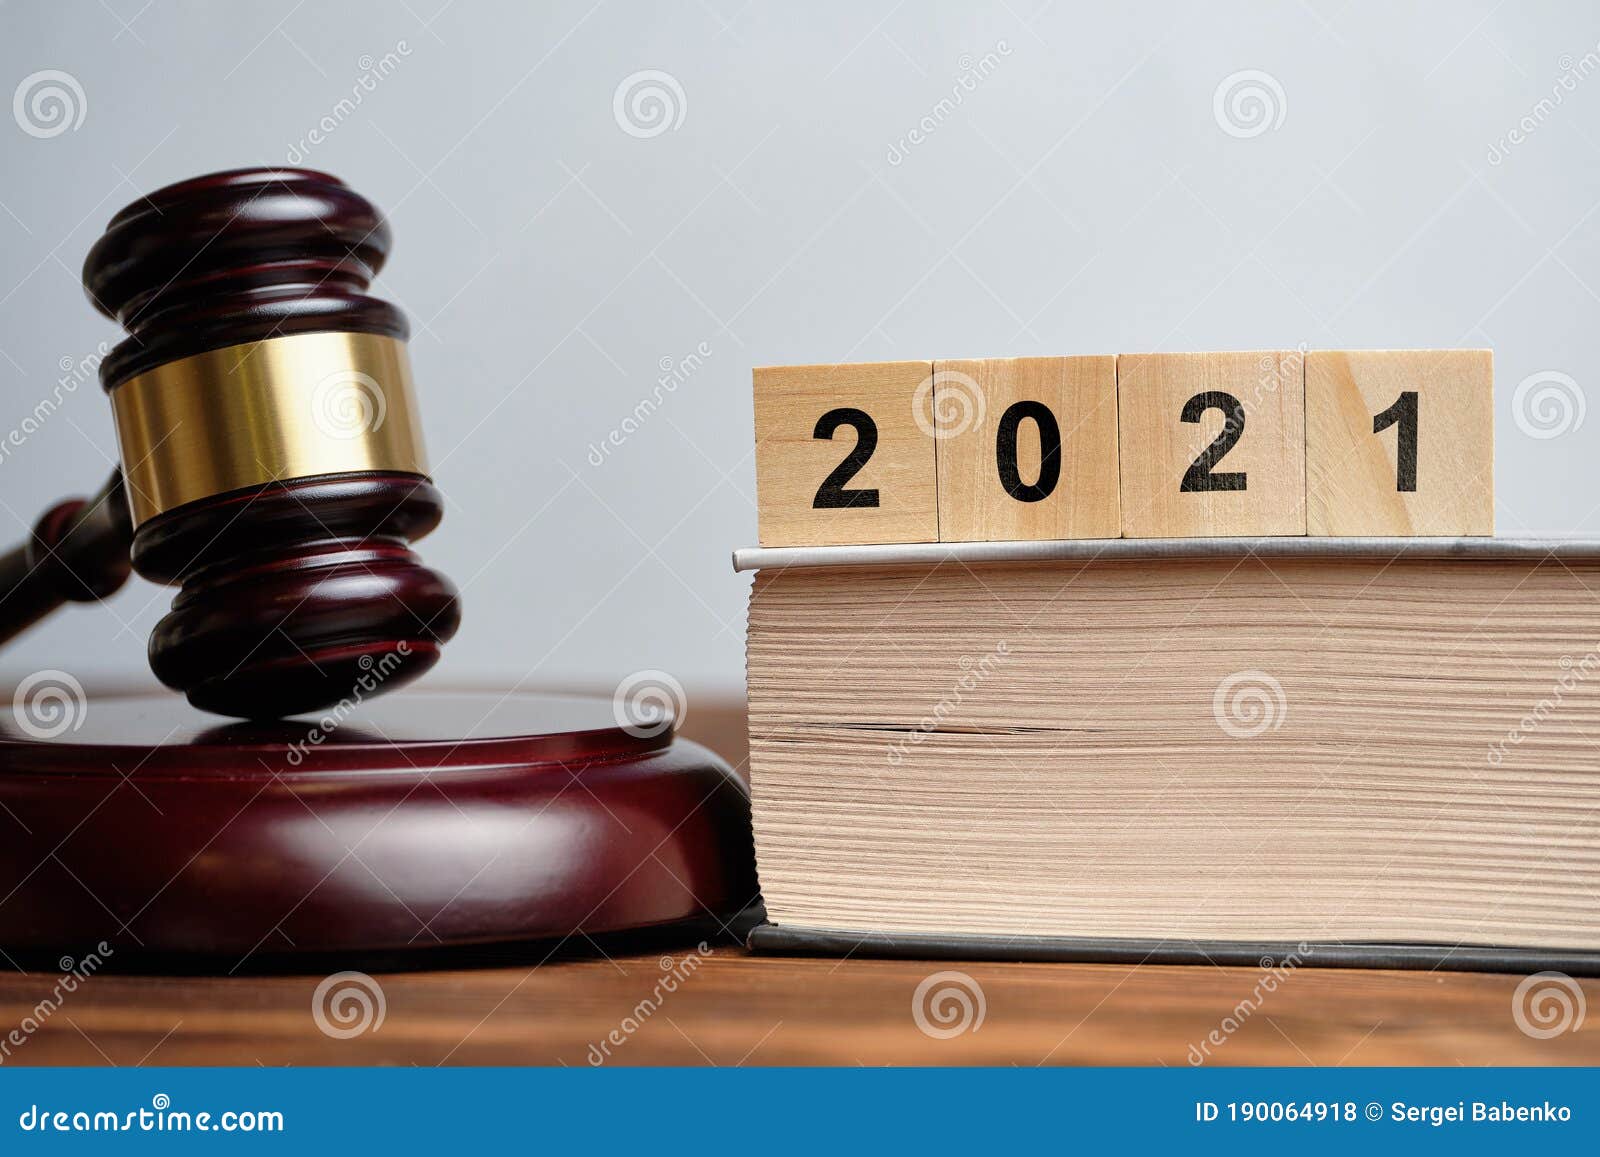 the concept of new laws in 2021 next to the judge hammer